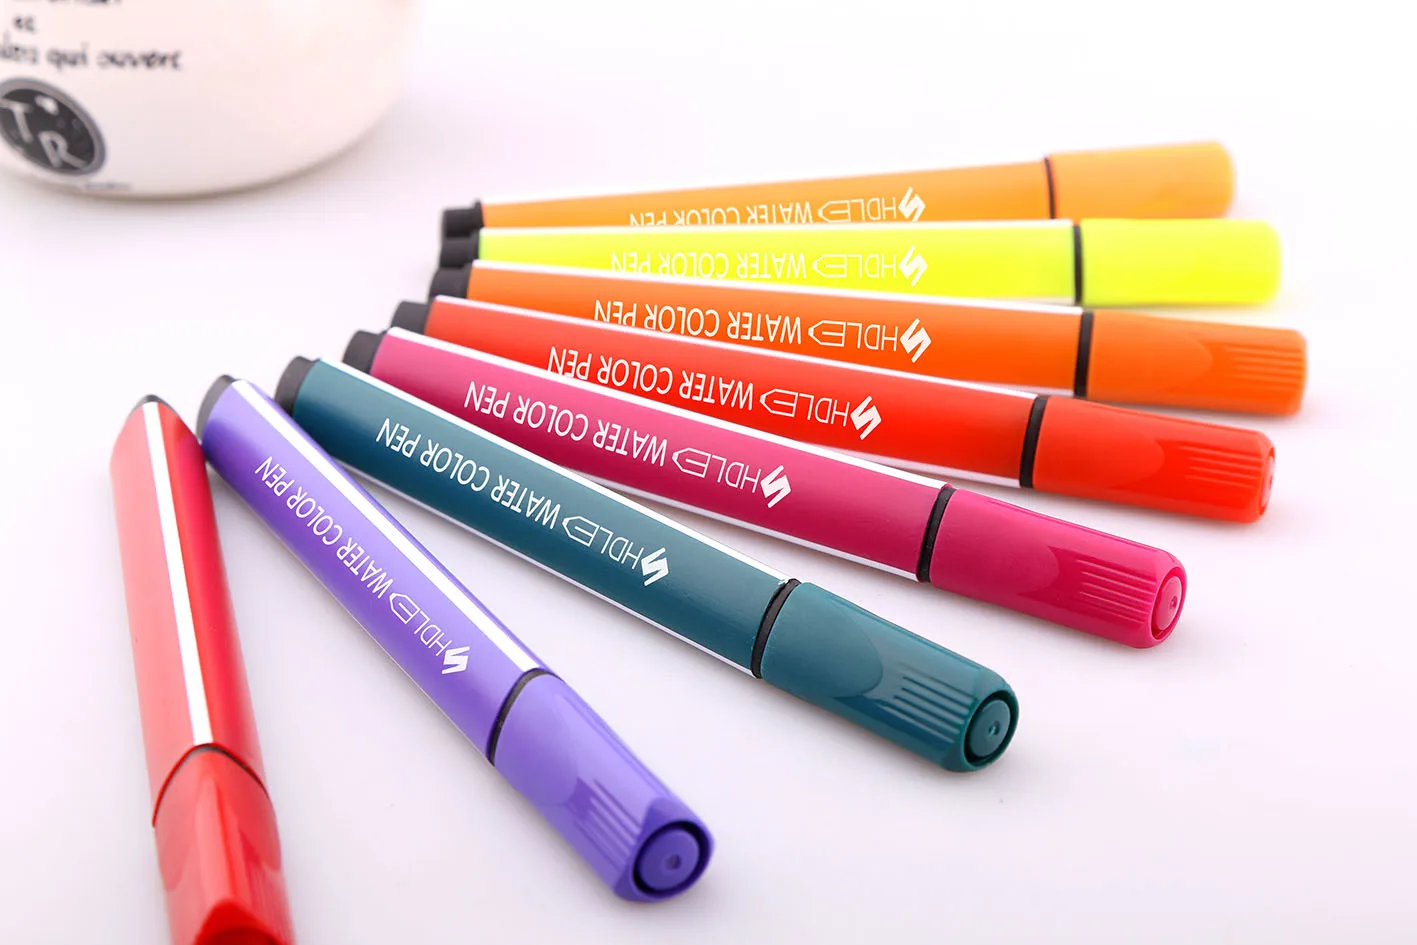 Sketch Pens In Ambernath, Maharashtra At Best Price | Sketch Pens  Manufacturers, Suppliers In Ambernath